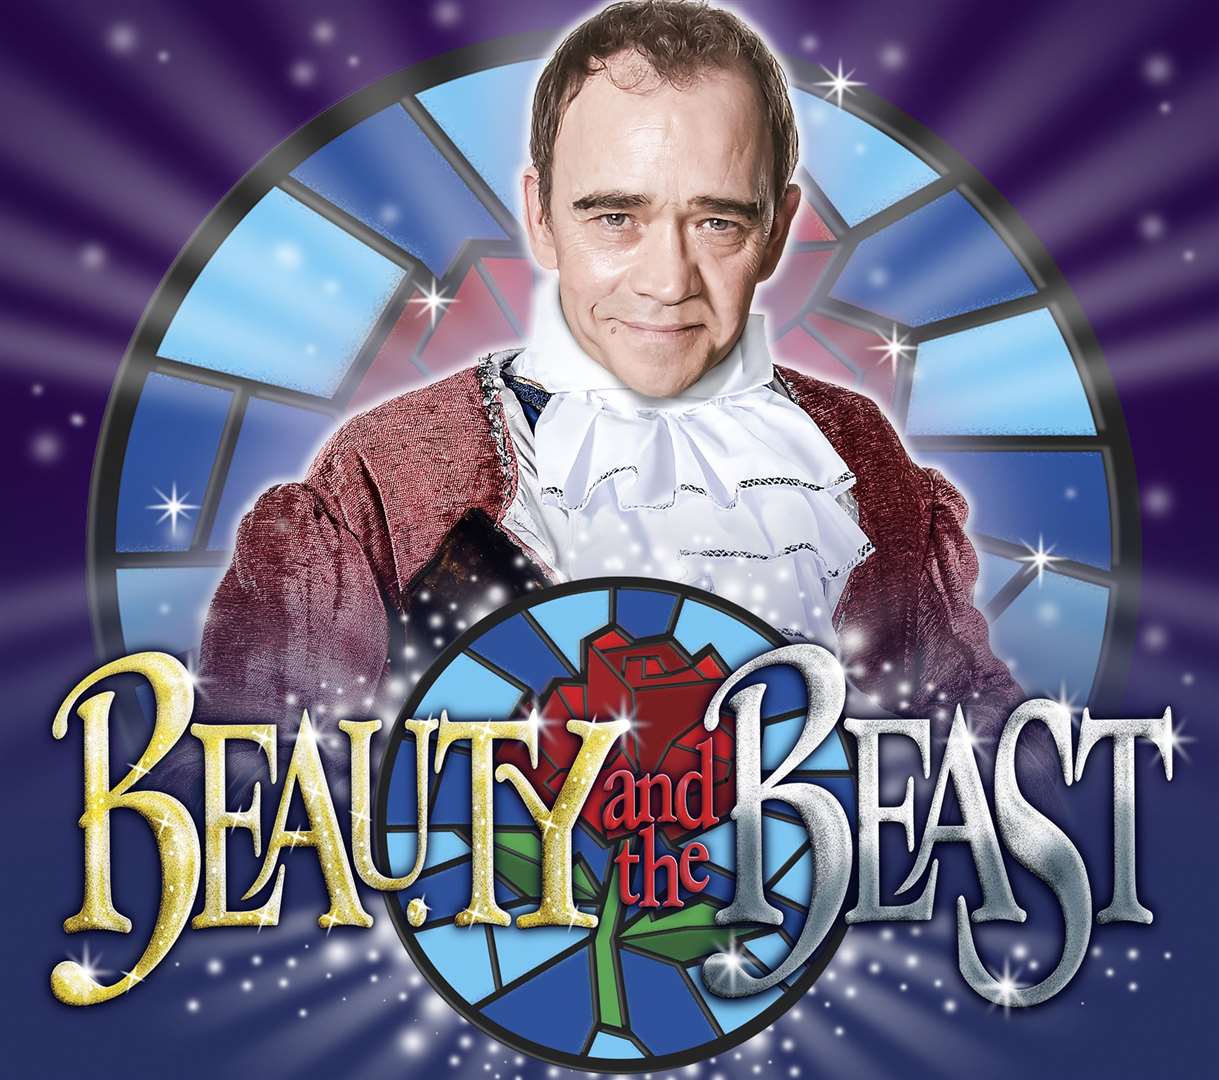 EastEnders legend Todd Carty, who played Mark Fowler in the long-running BBC soap, will be performing in Beauty and the Beast at Chatham's Central Theatre. Picture: Jordan Productions